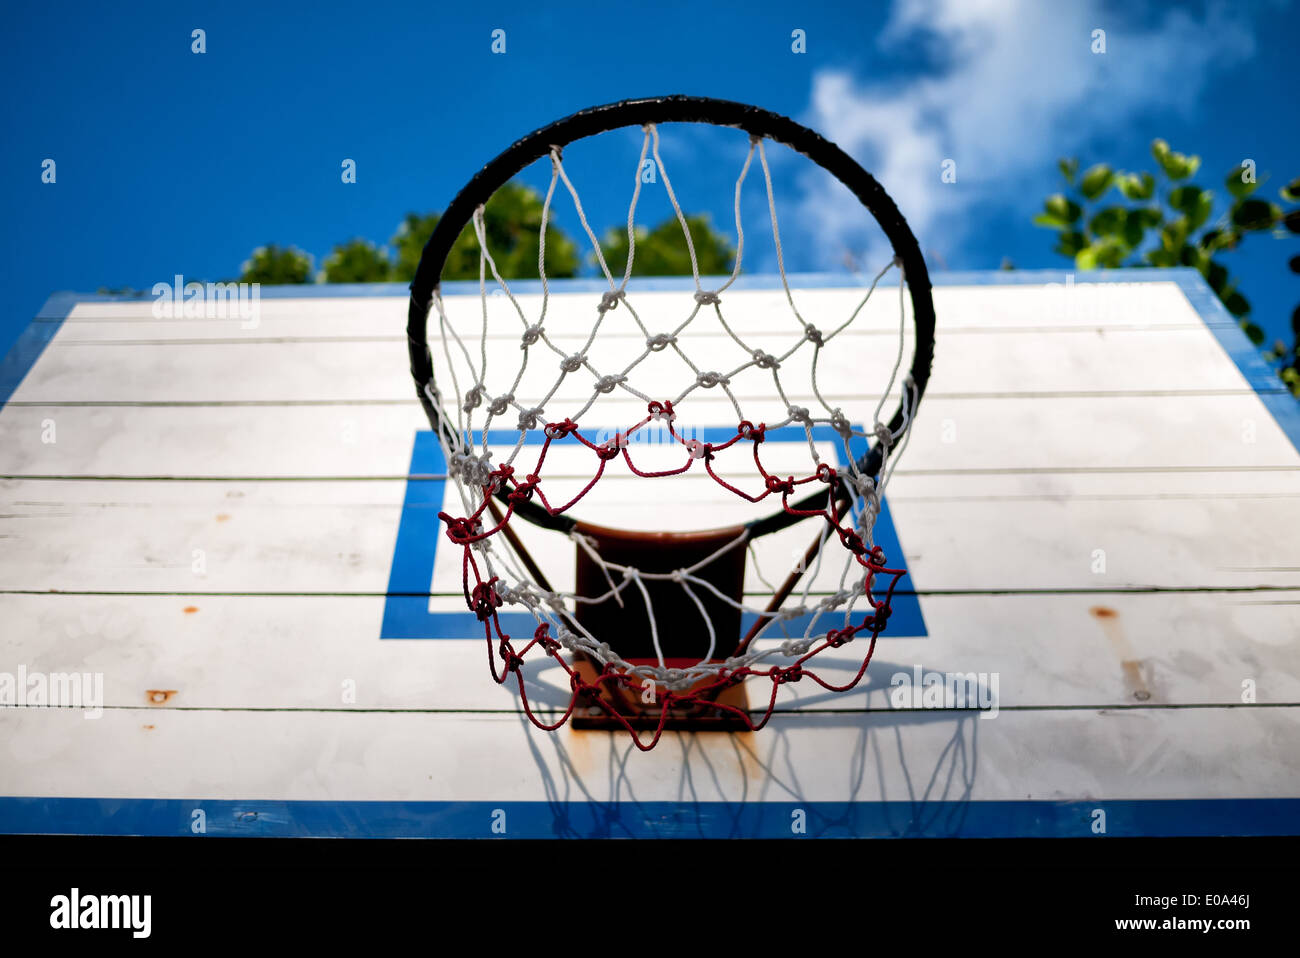 An old basketball backboard and rim under blue sky Stock Photo